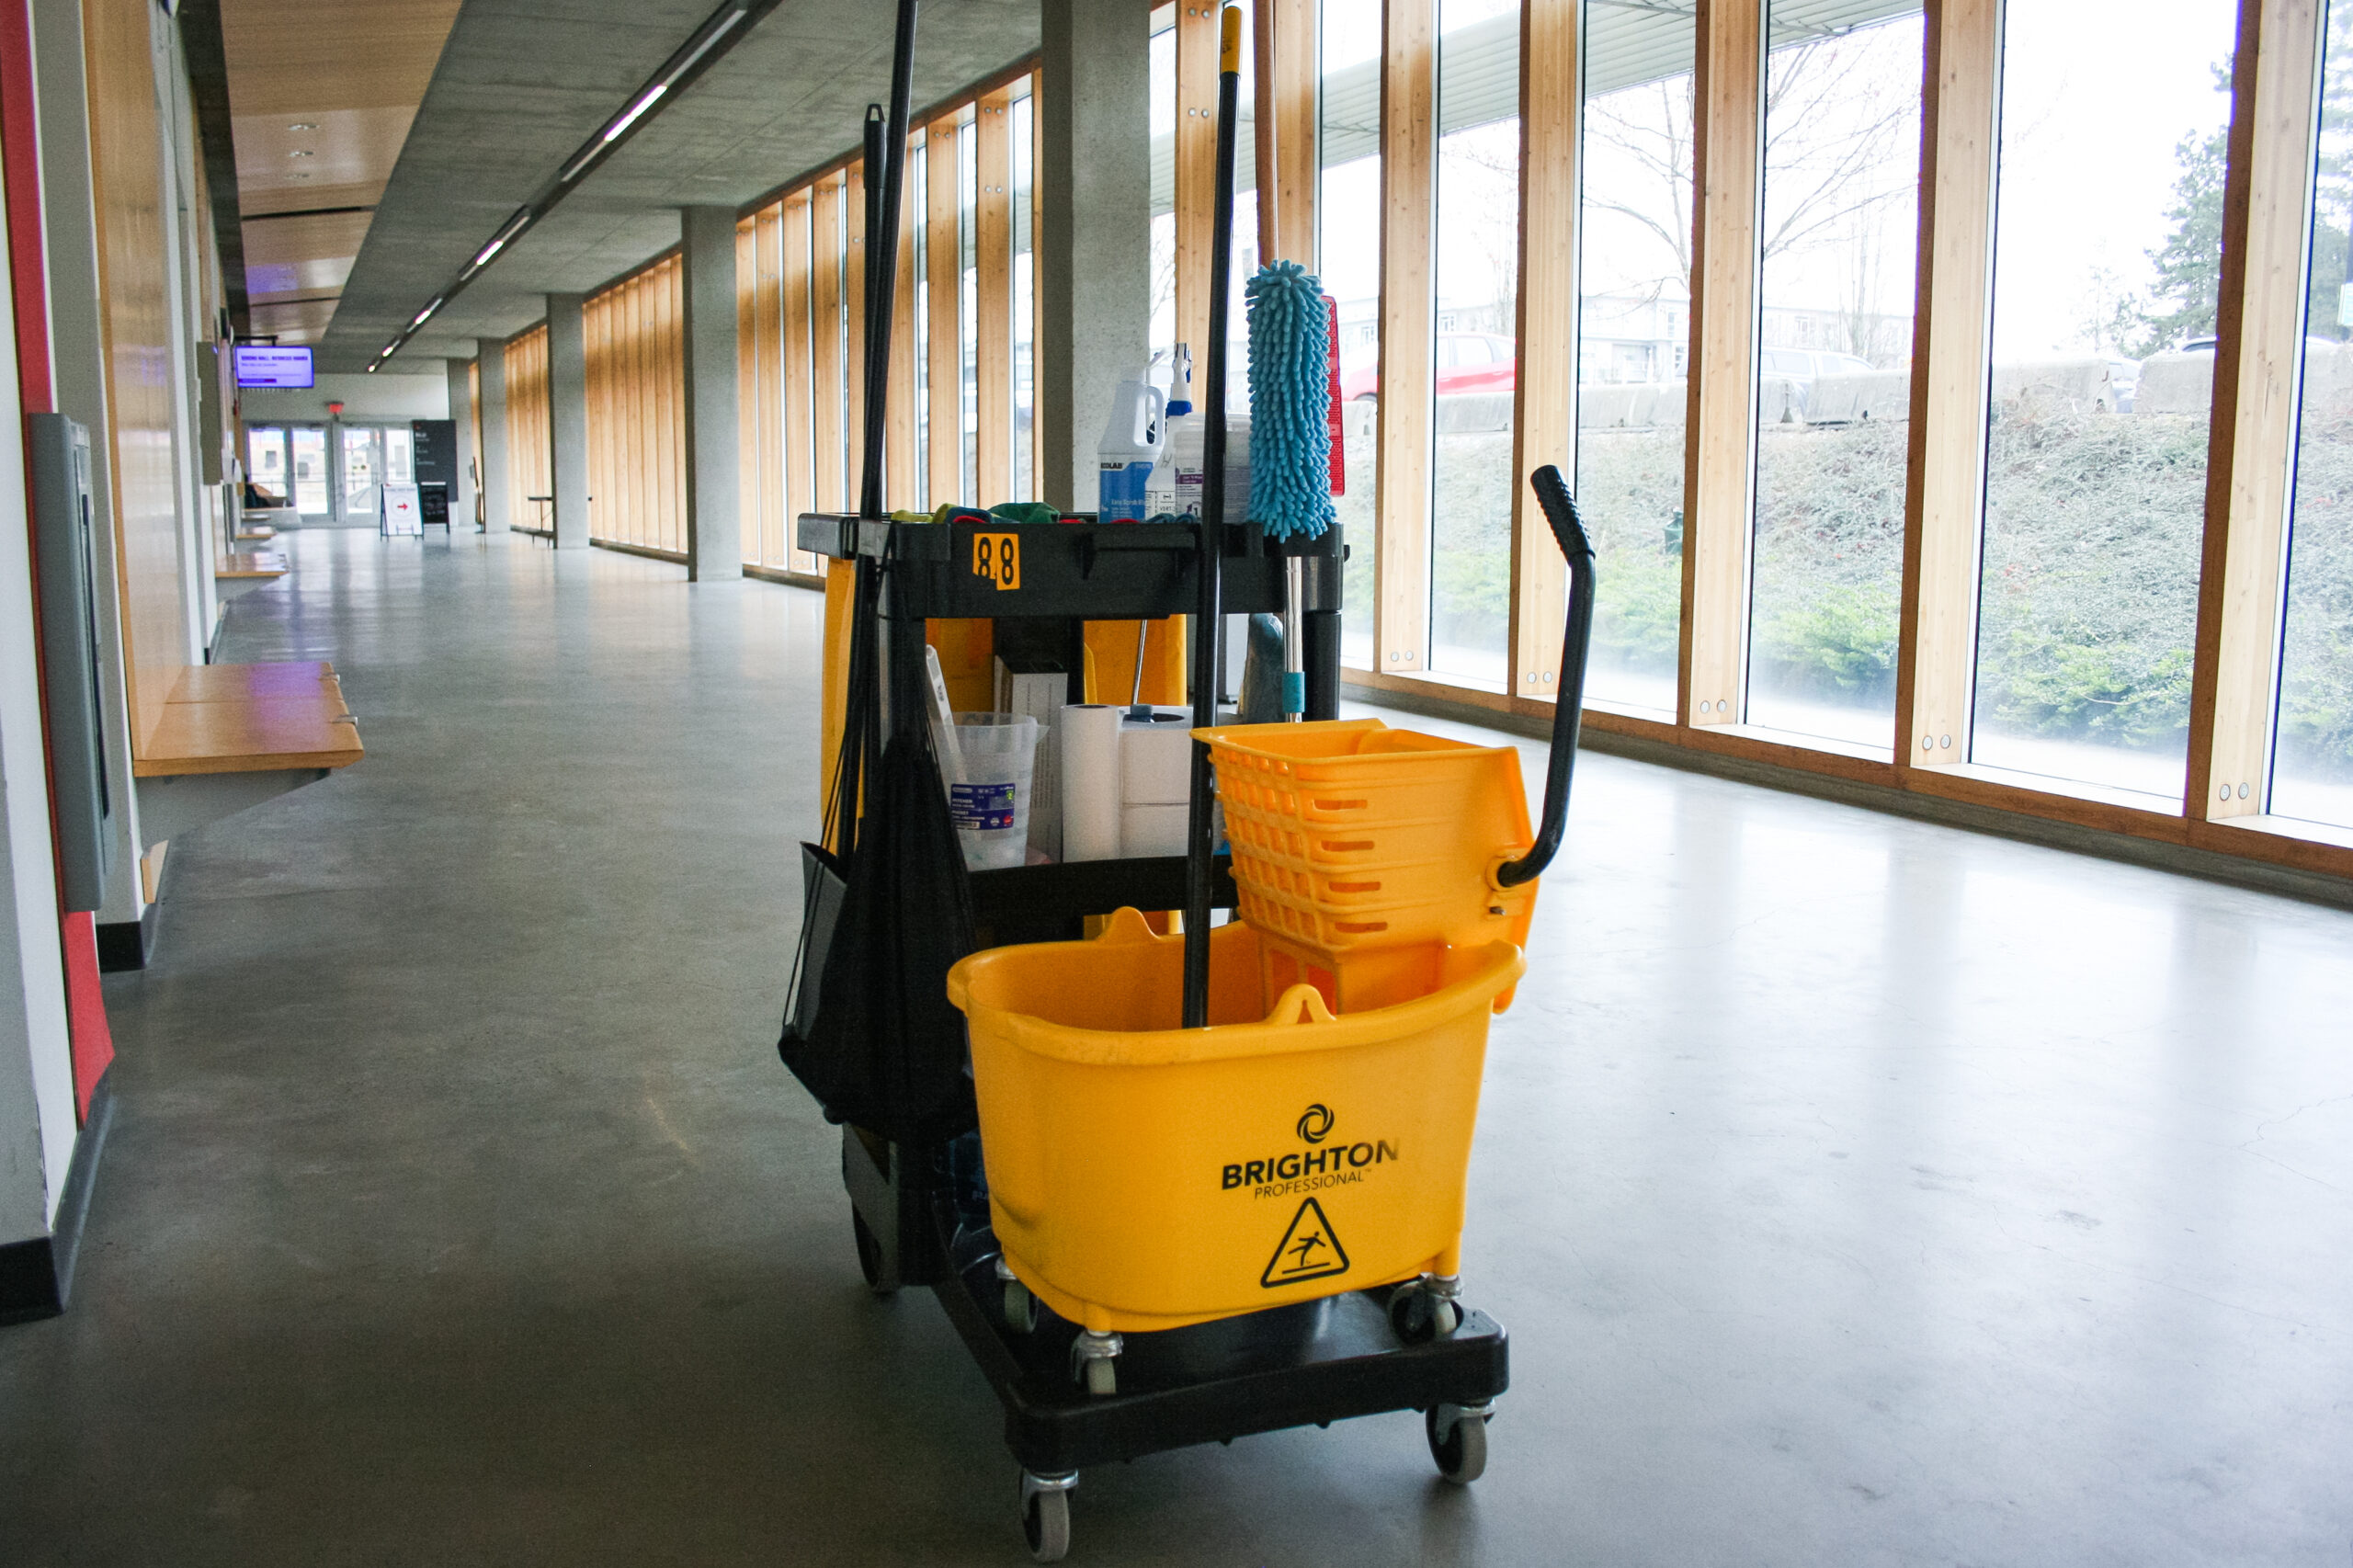 Blusson hallway with a cleaner’s cart in the center.